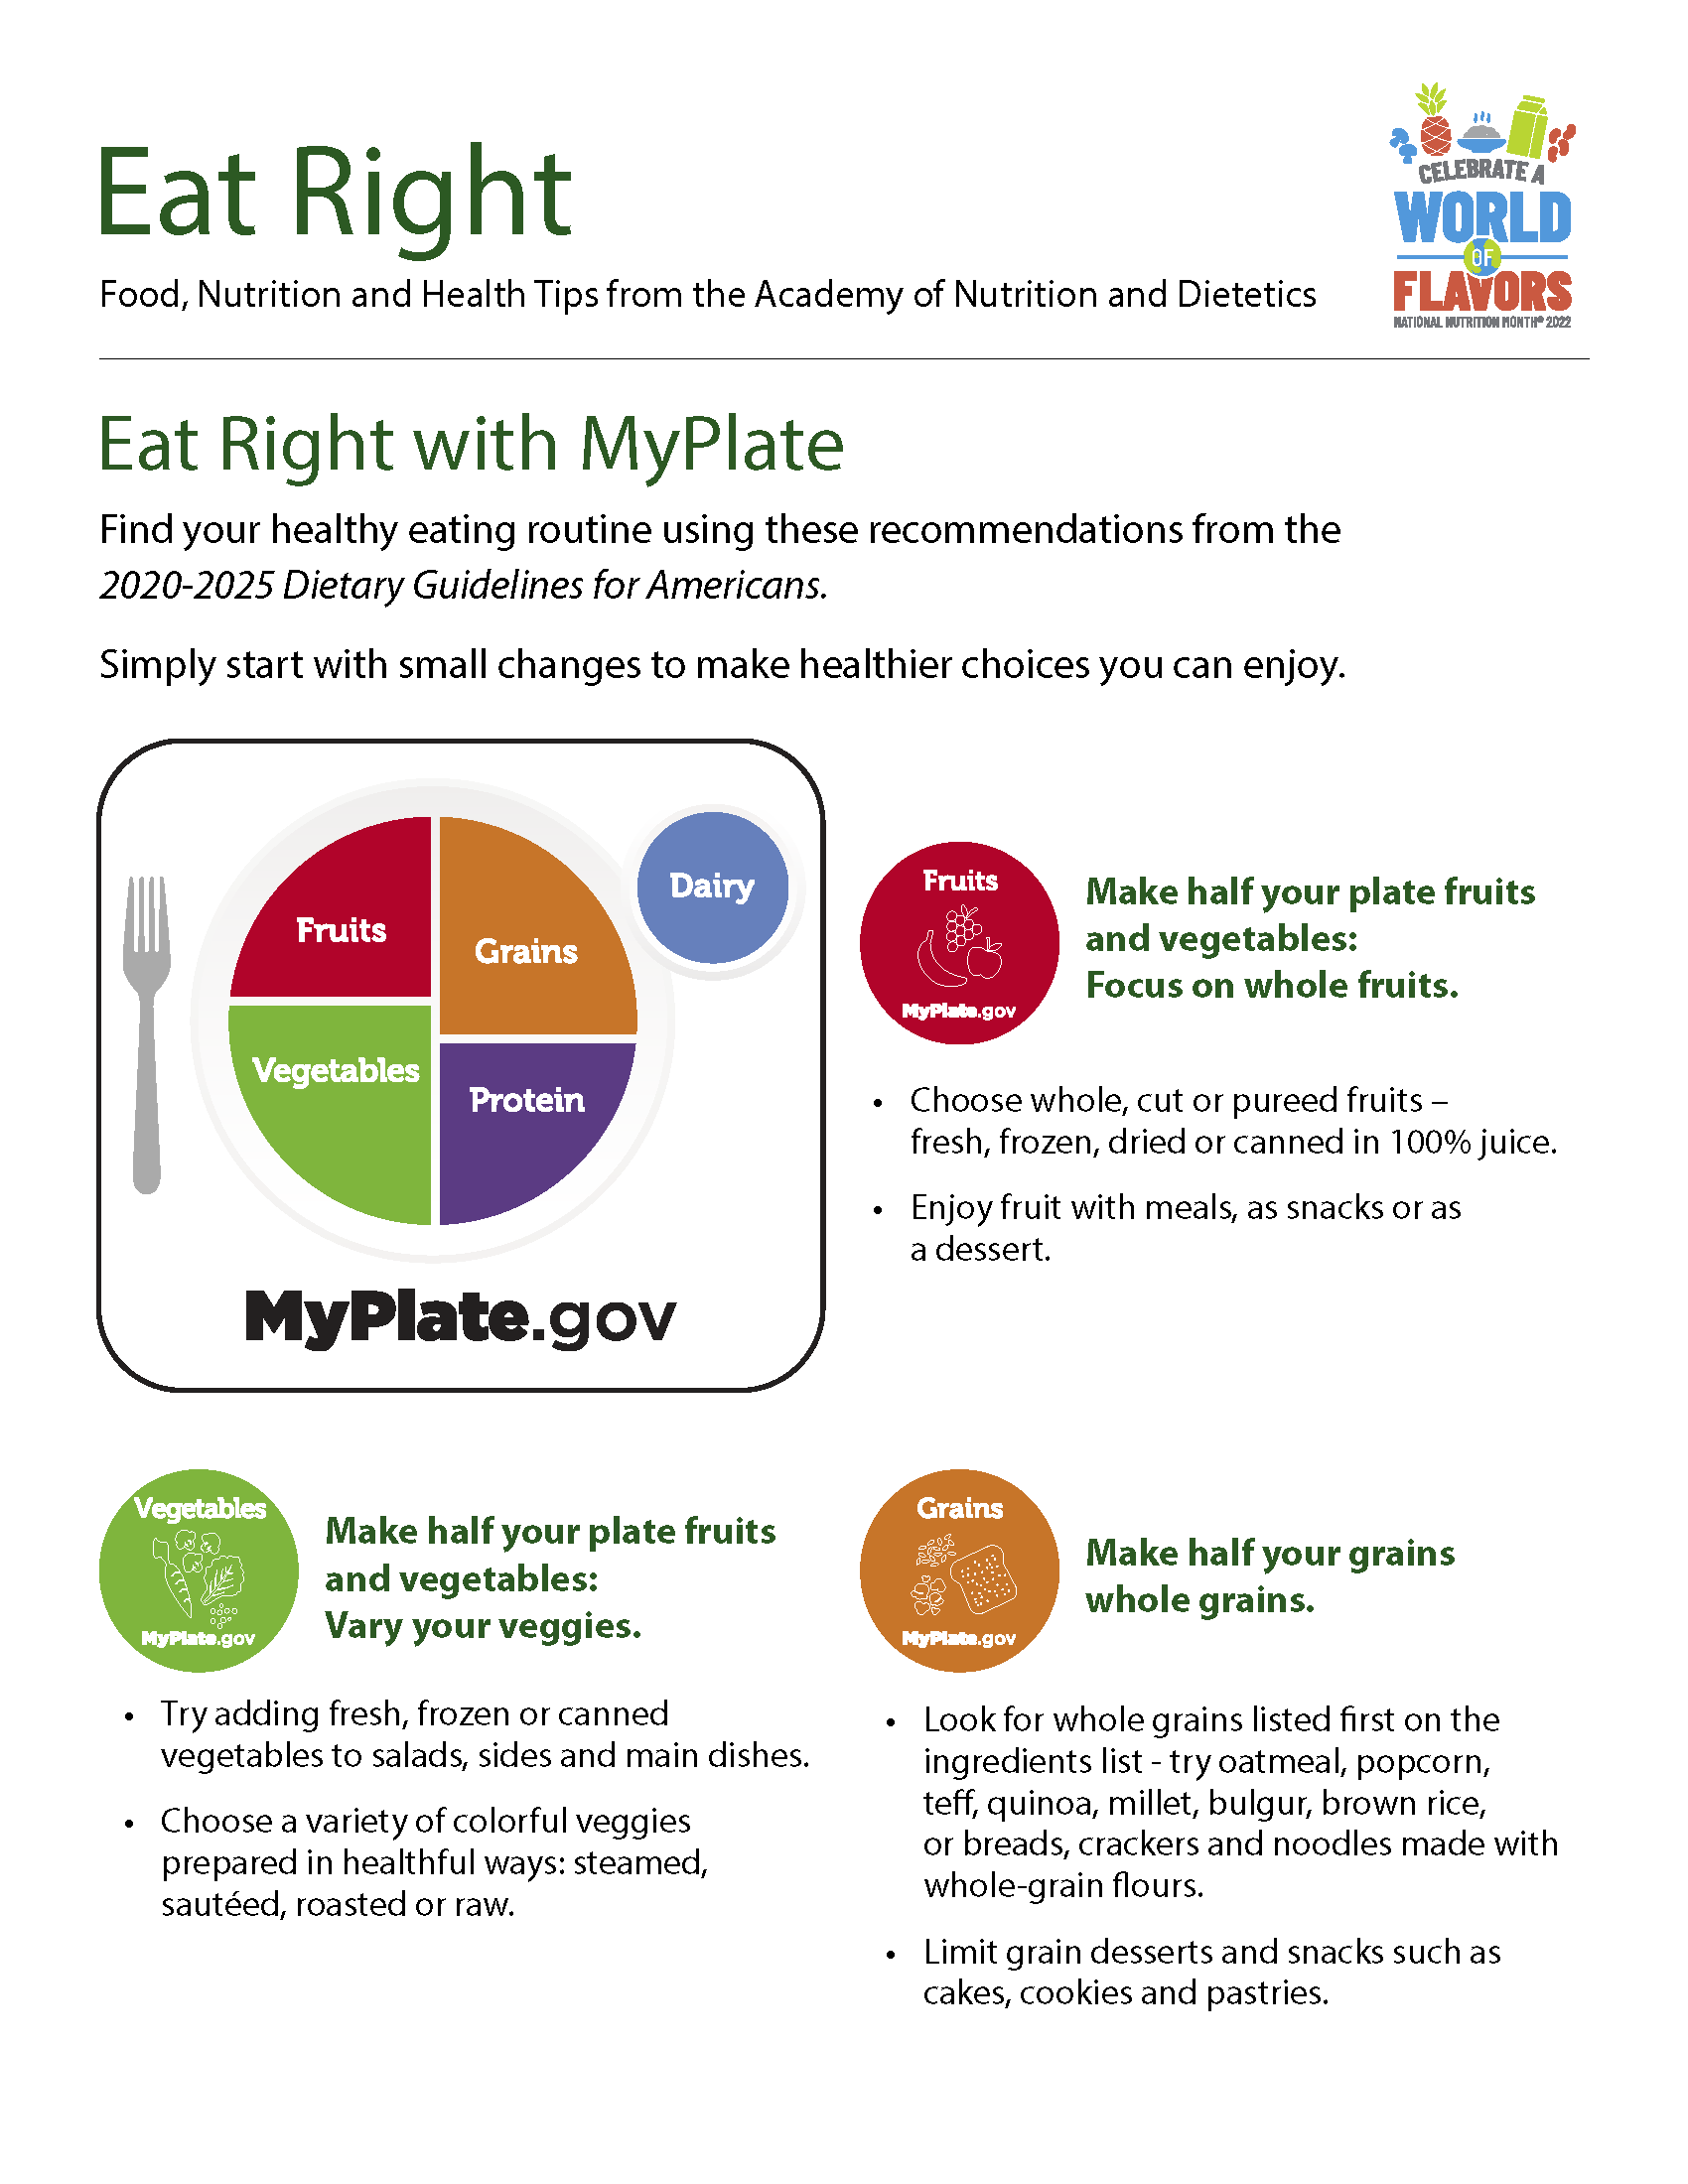 Fact Sheet: Eat Right with MyPlate